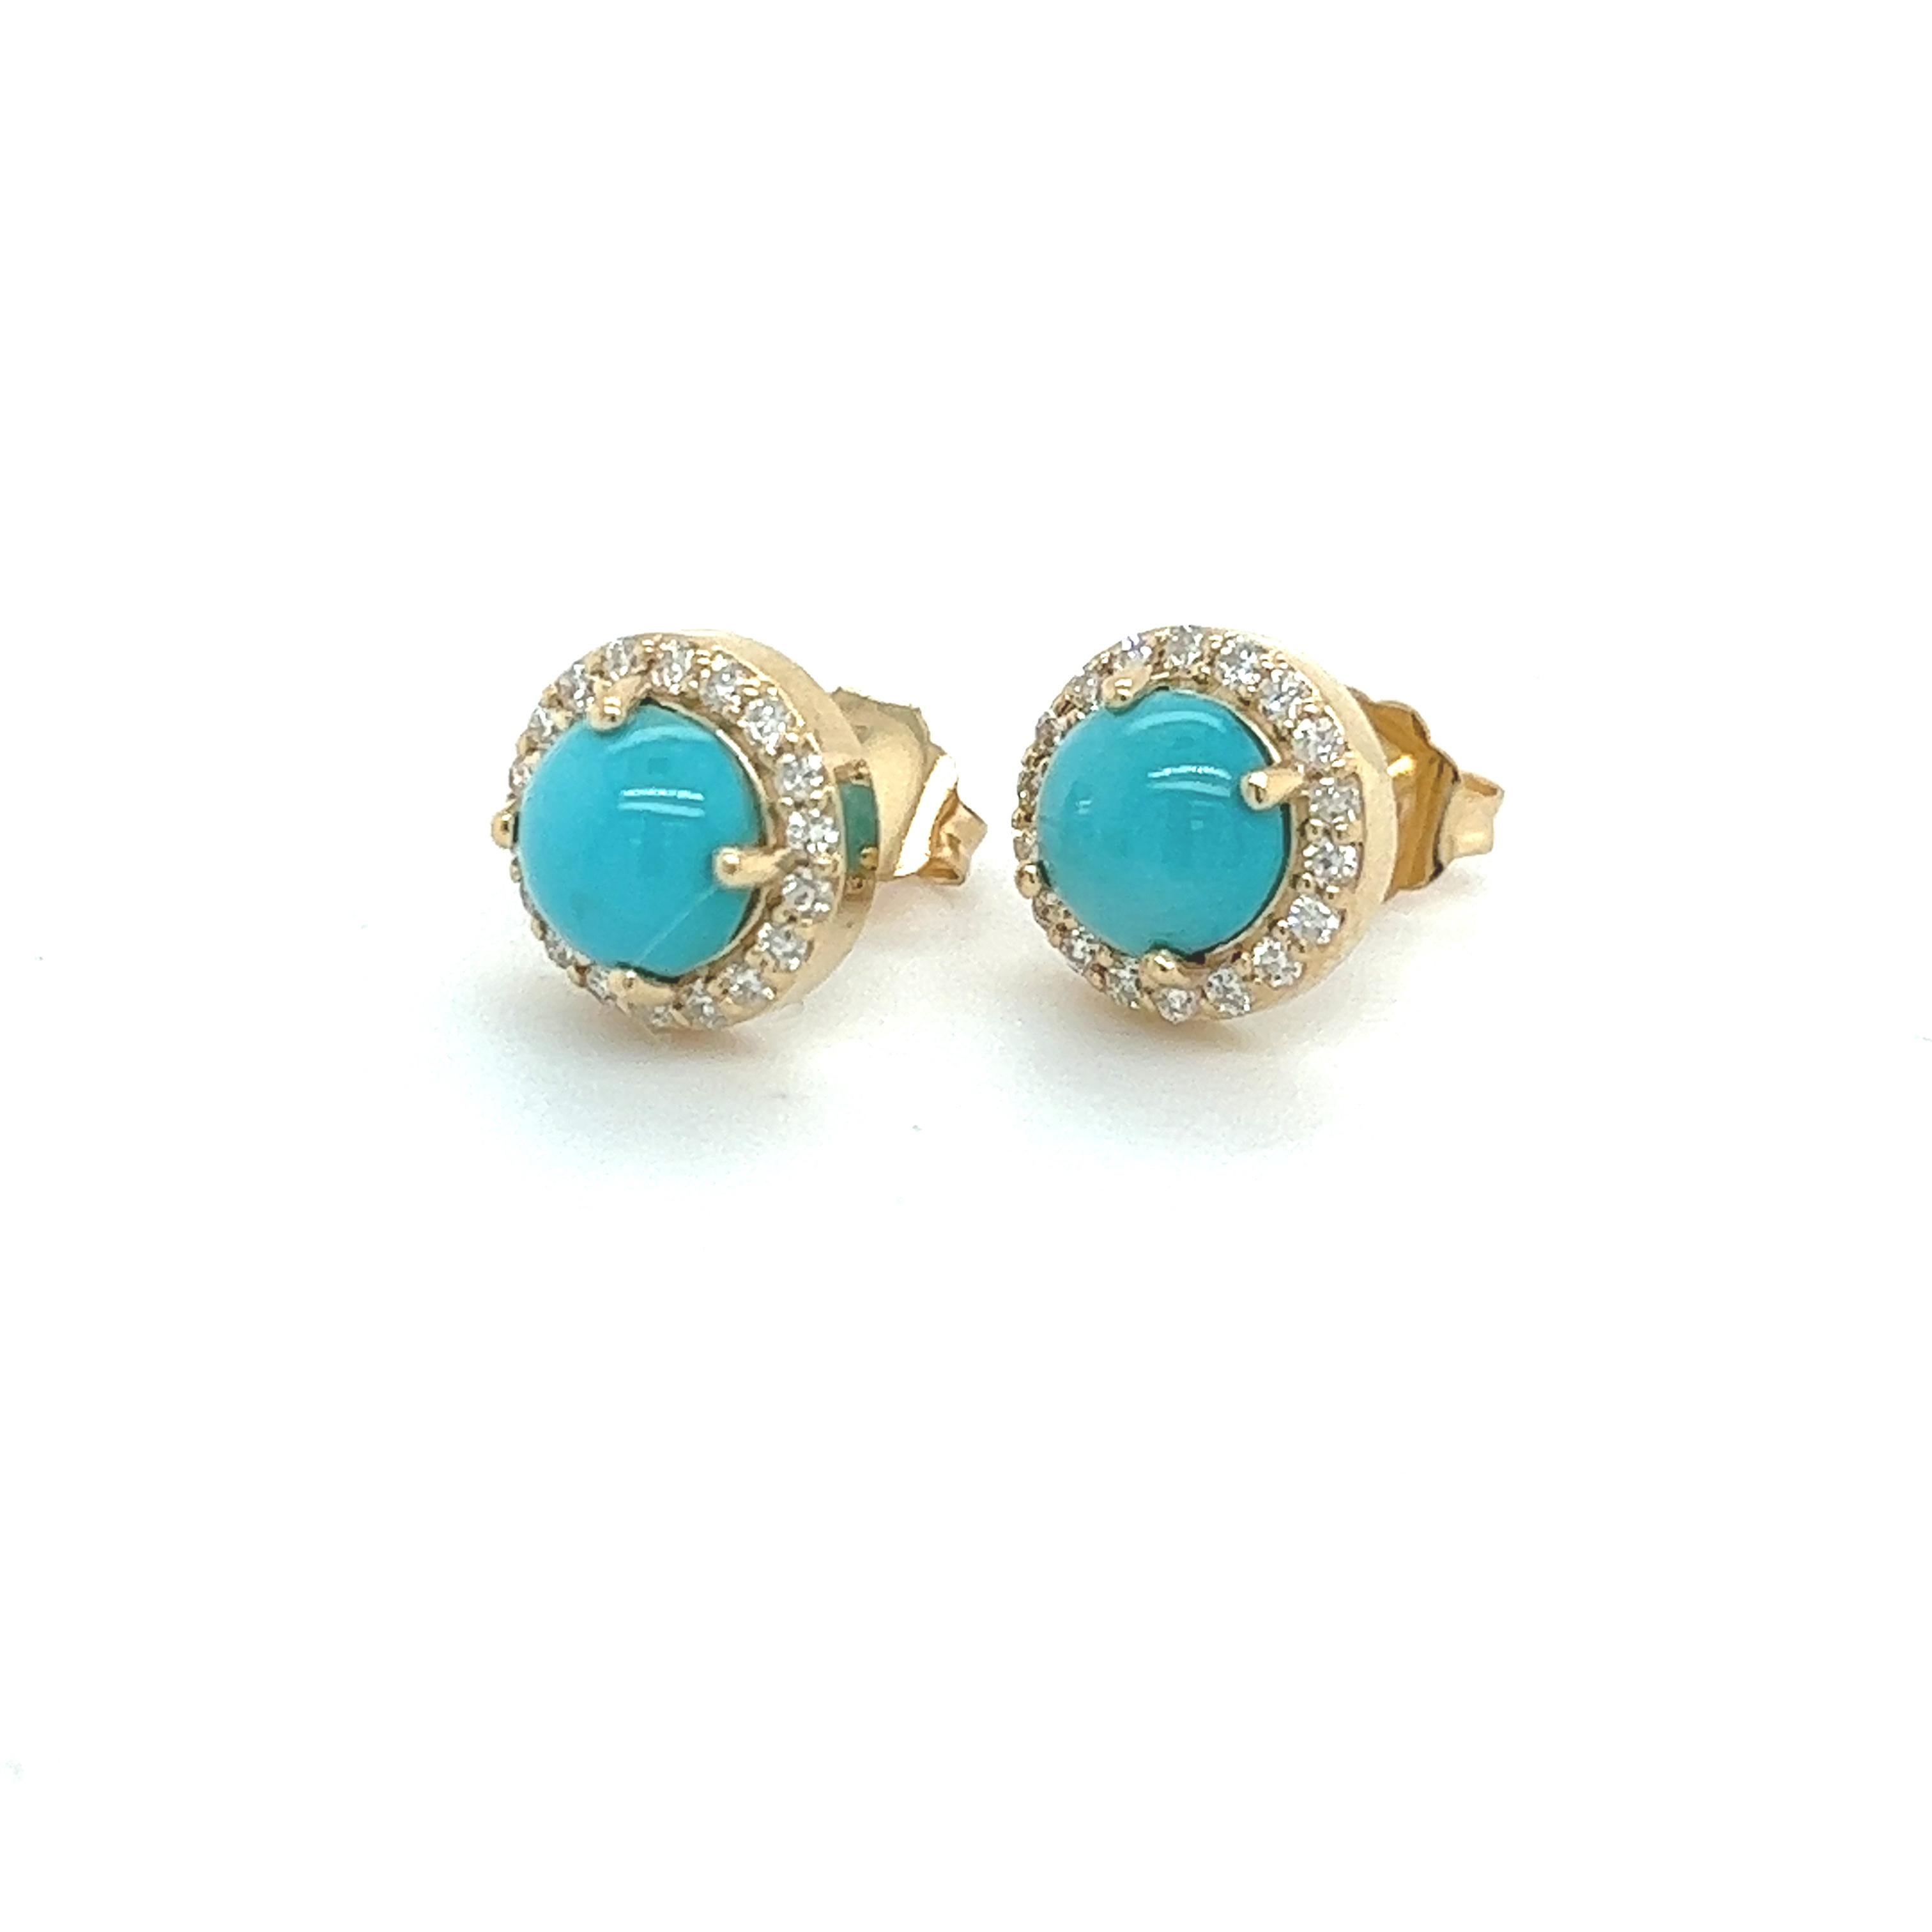 Natural Turquoise Diamond Stud Earrings 14k Yellow Gold 2.18 TCW Certified $2,490 217839

This is a Unique Custom Made Glamorous Piece of Jewelry!

Nothing says, “I Love you” more than Diamonds and Pearls!

These Sapphire earrings have been